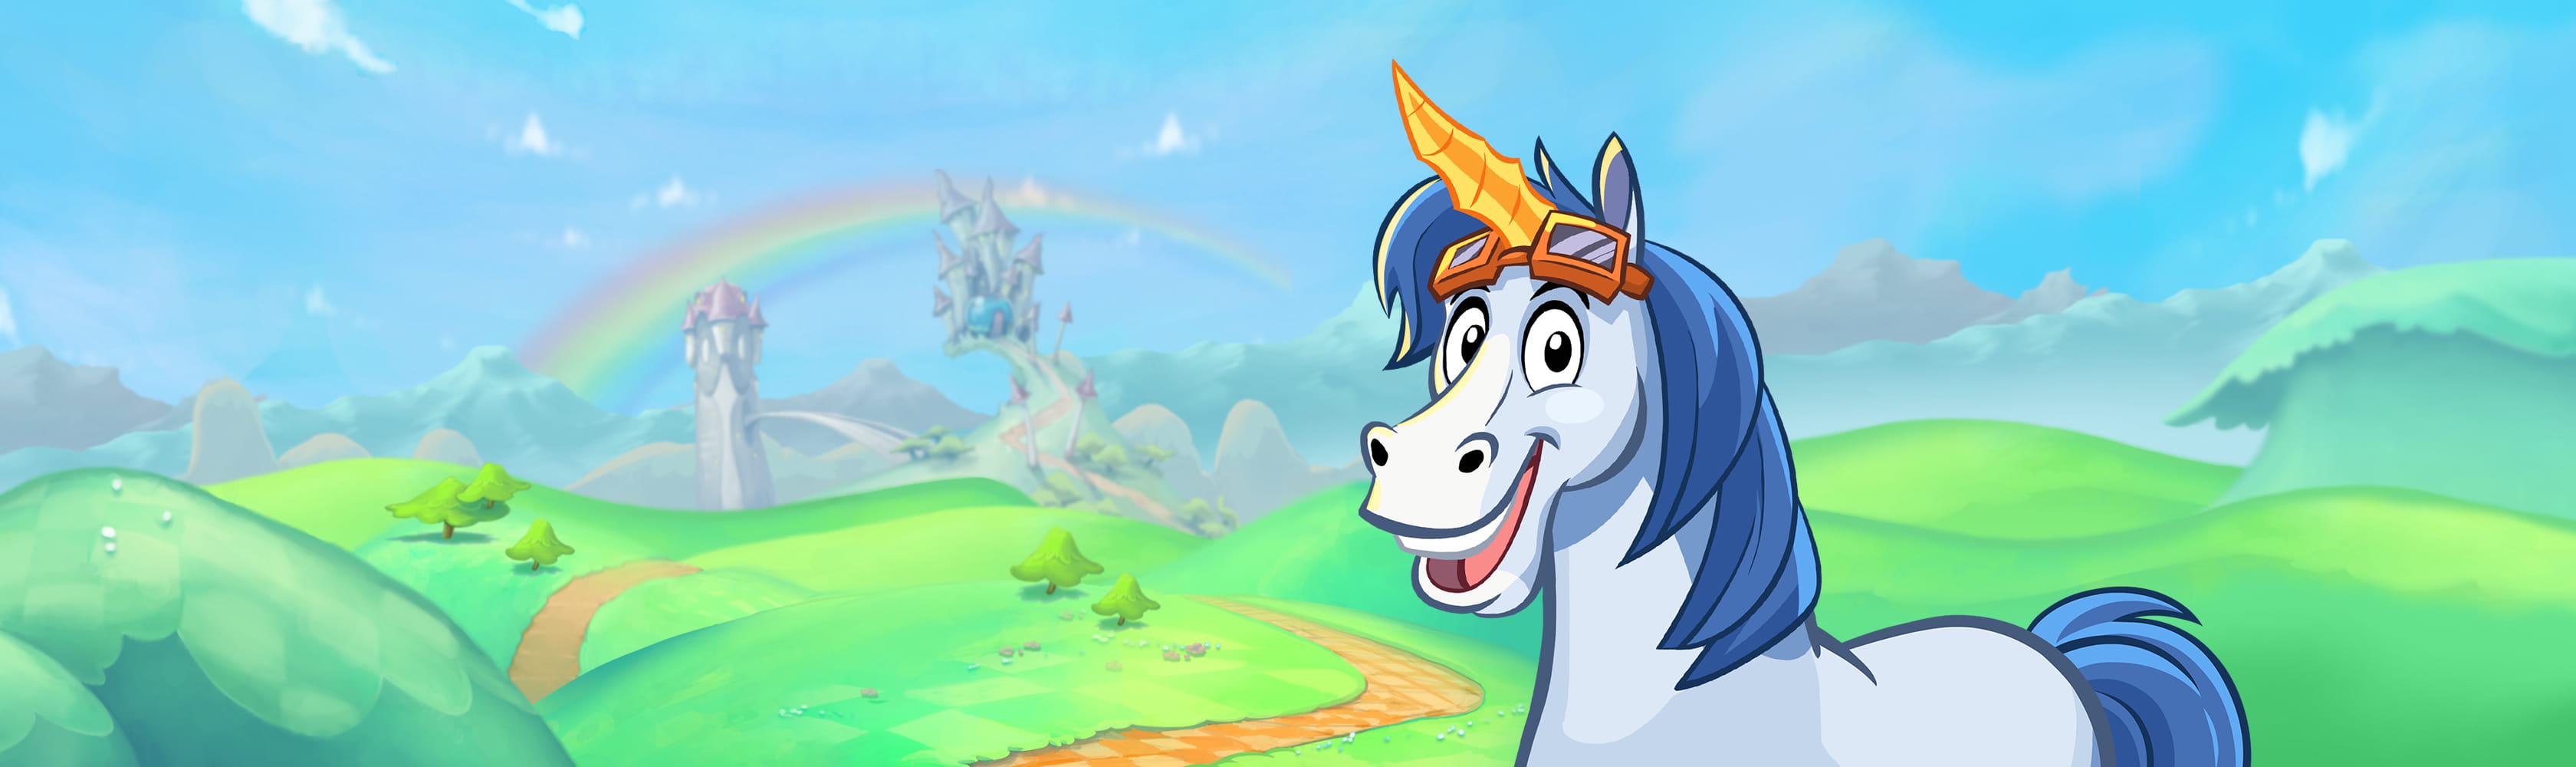 peggle deluxe online play